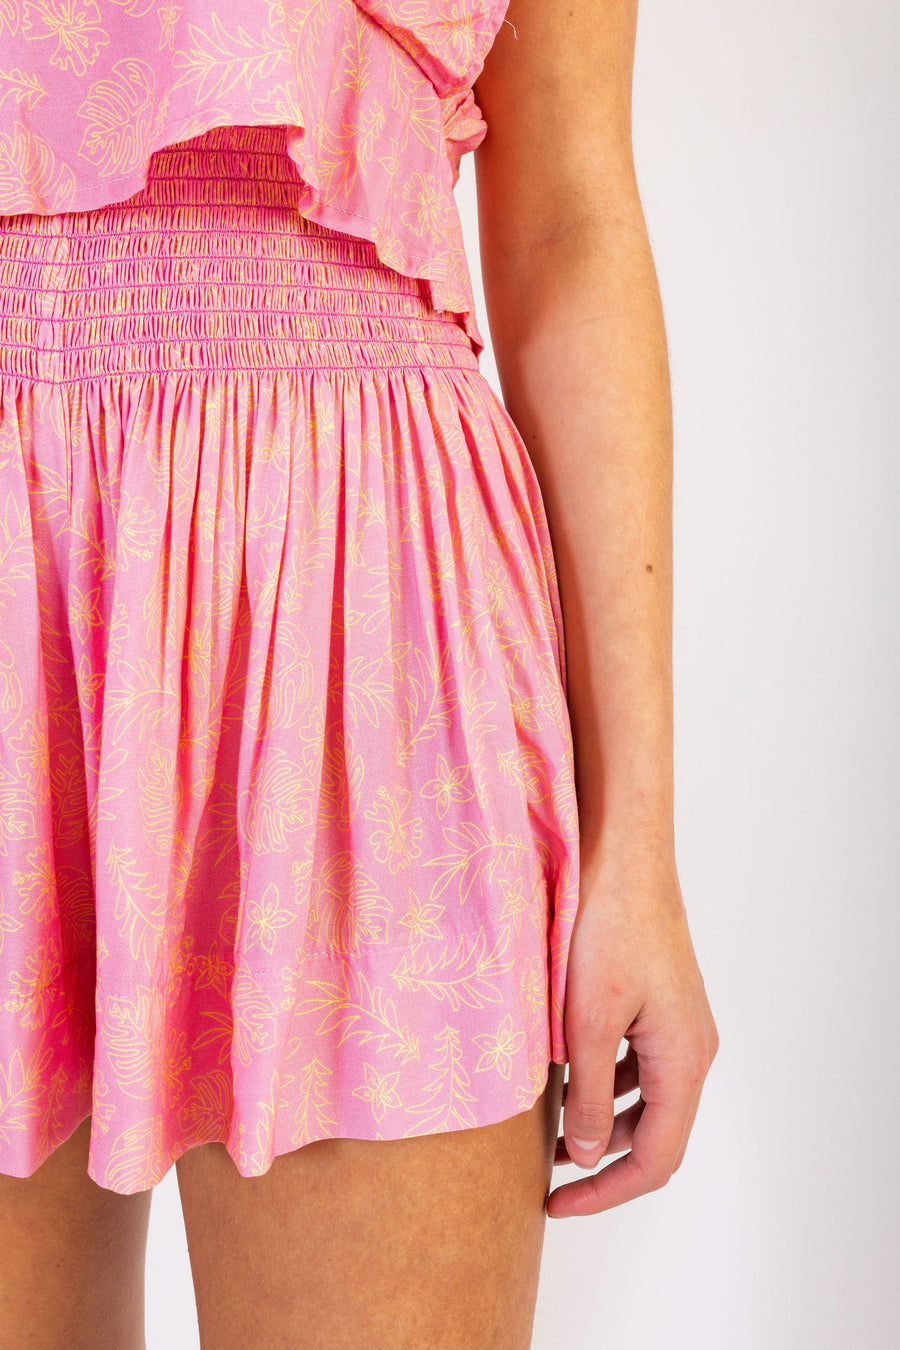 Erica Skirt Pink Surf Toile